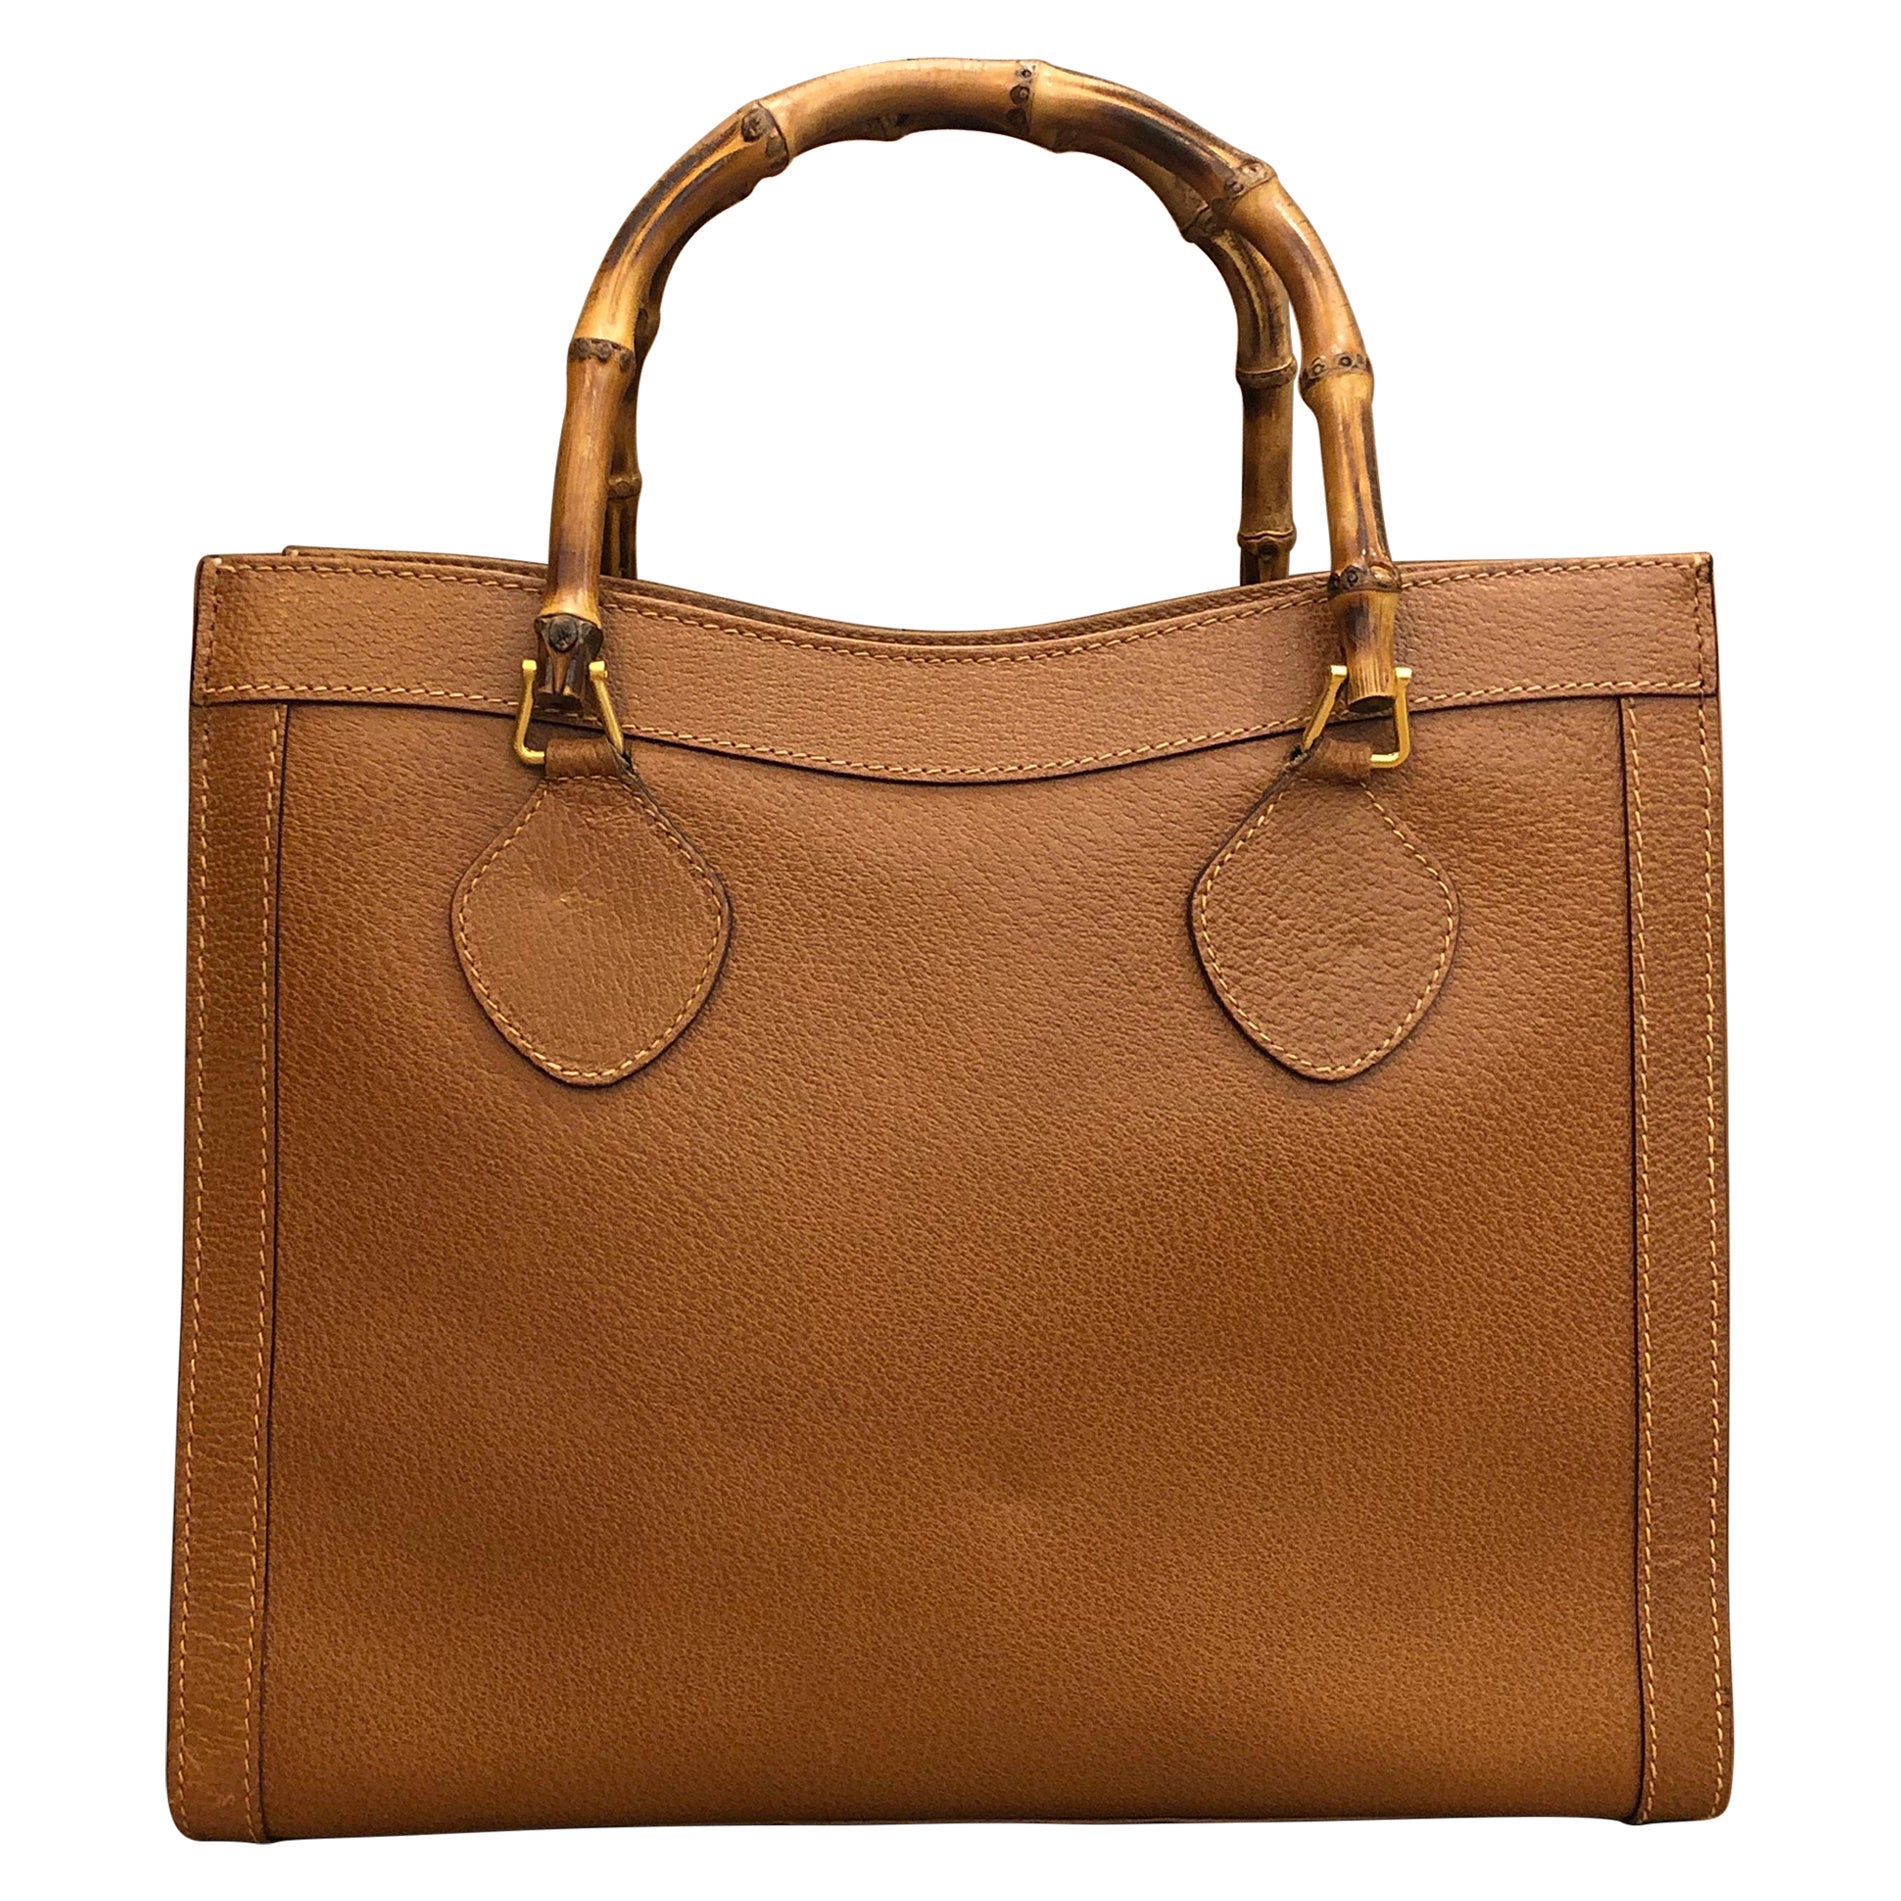 1990s Vintage GUCCI Brown Leather Bamboo Tote Diana Tote Bag (Medium)